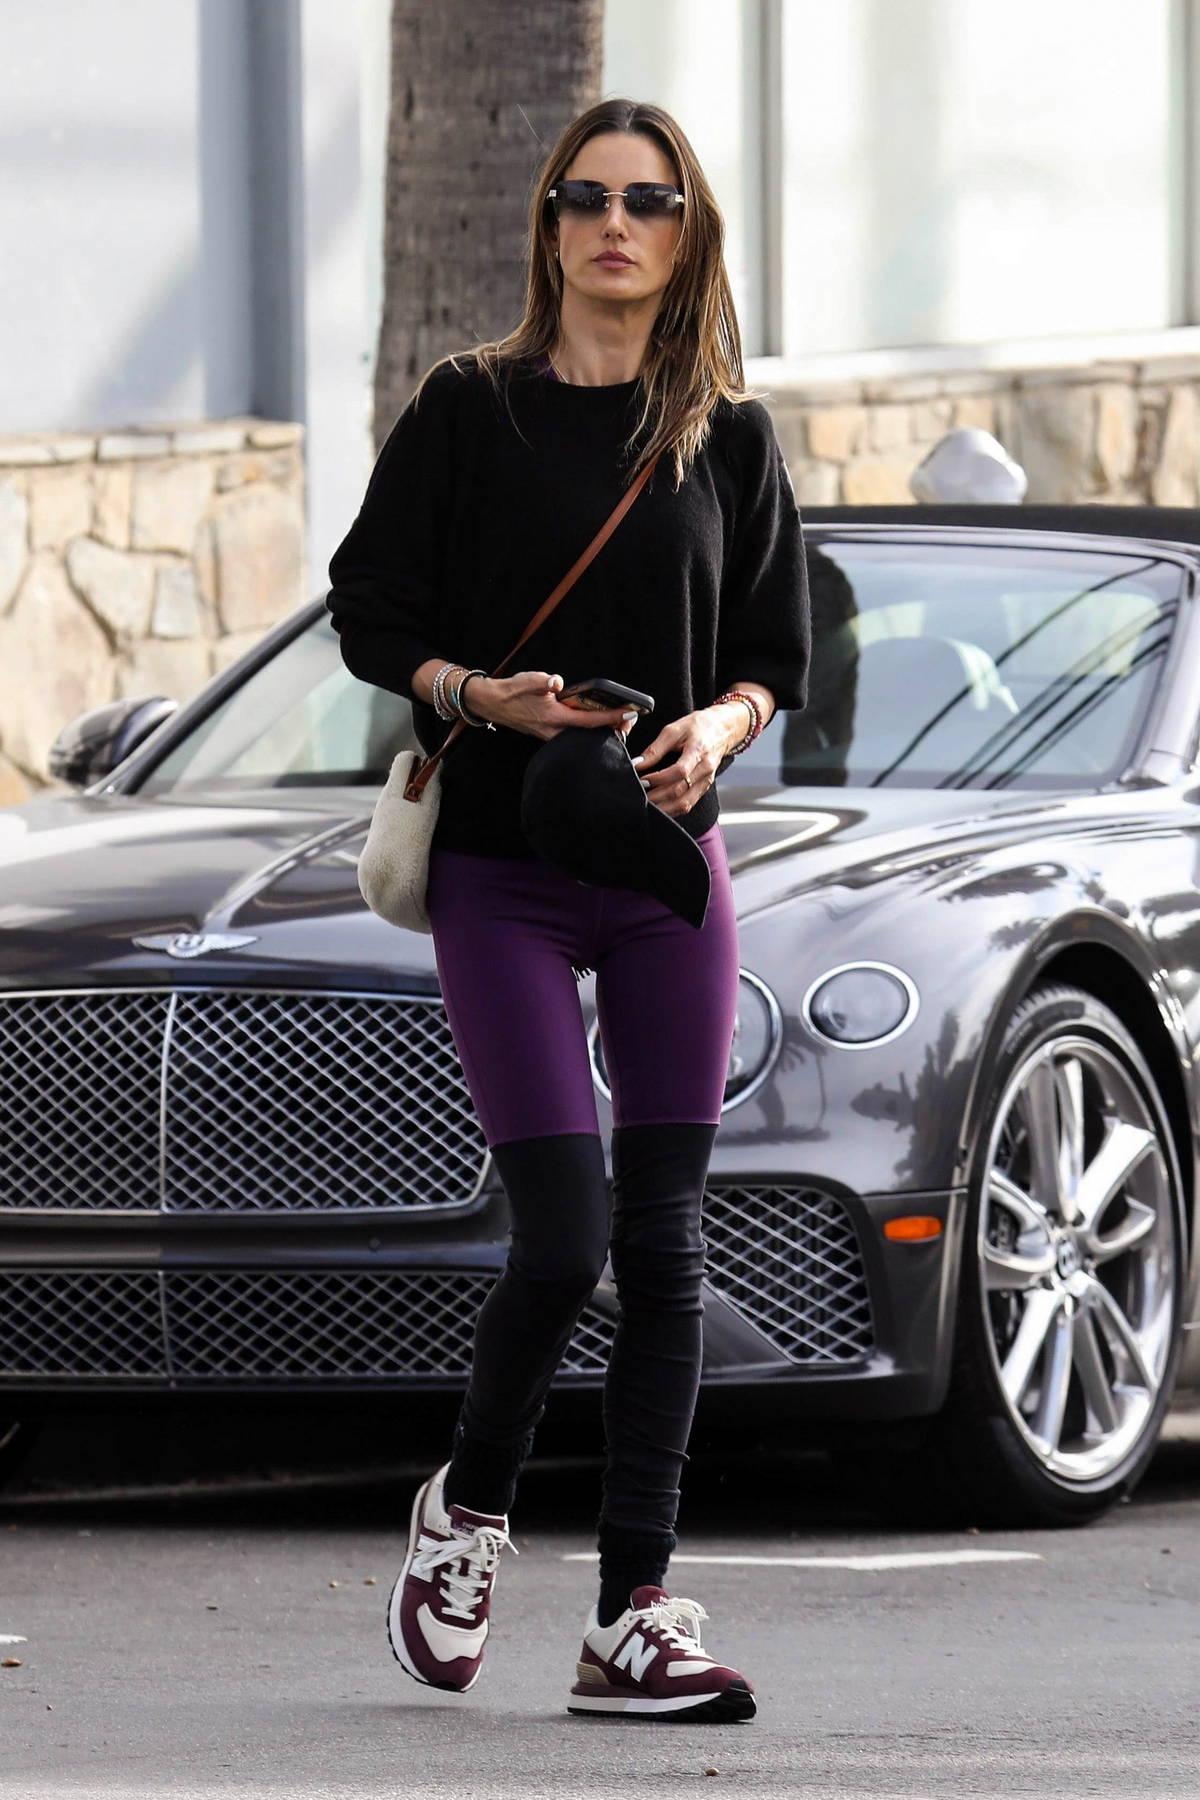 Alessandra Ambrosio rocks a black sweater with purple leggings during a  solo shopping trip to Elysewalker